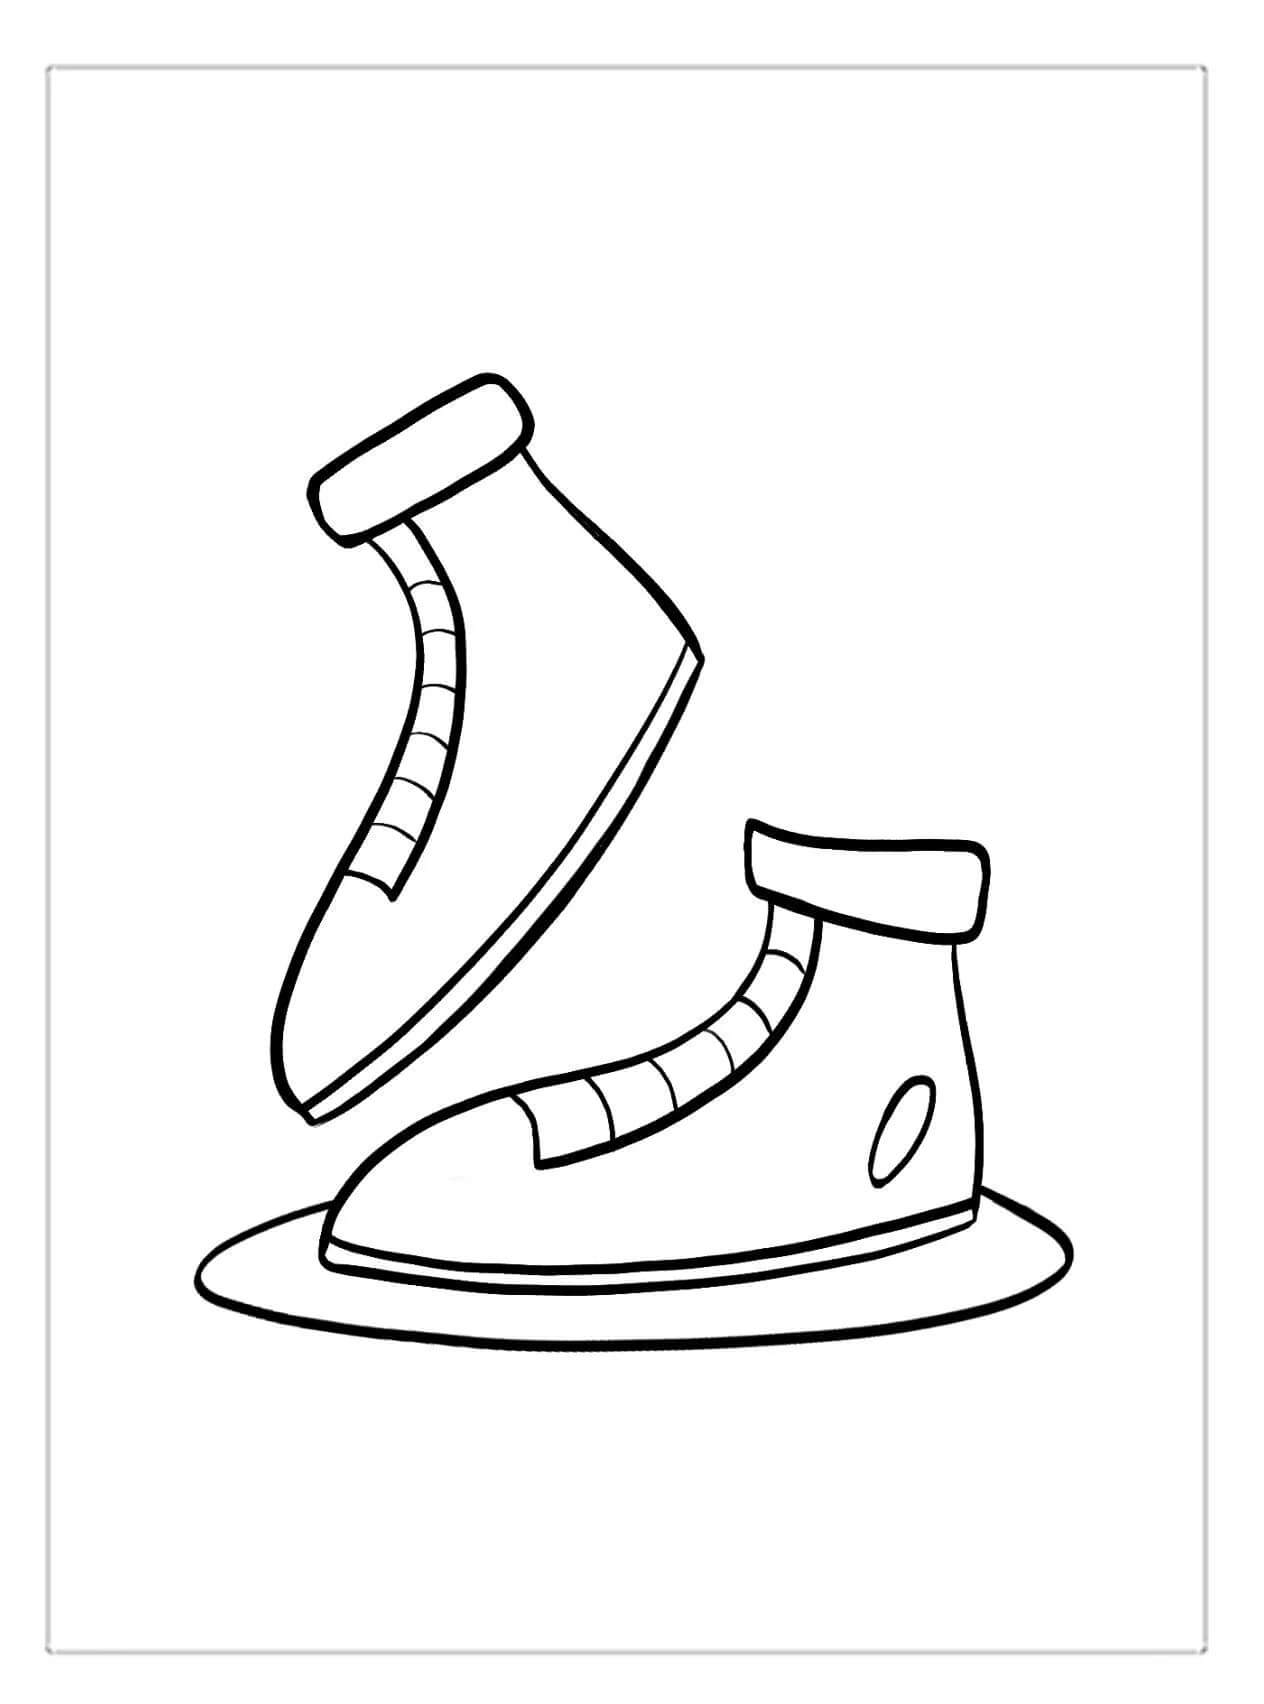 Zapato coloring pages